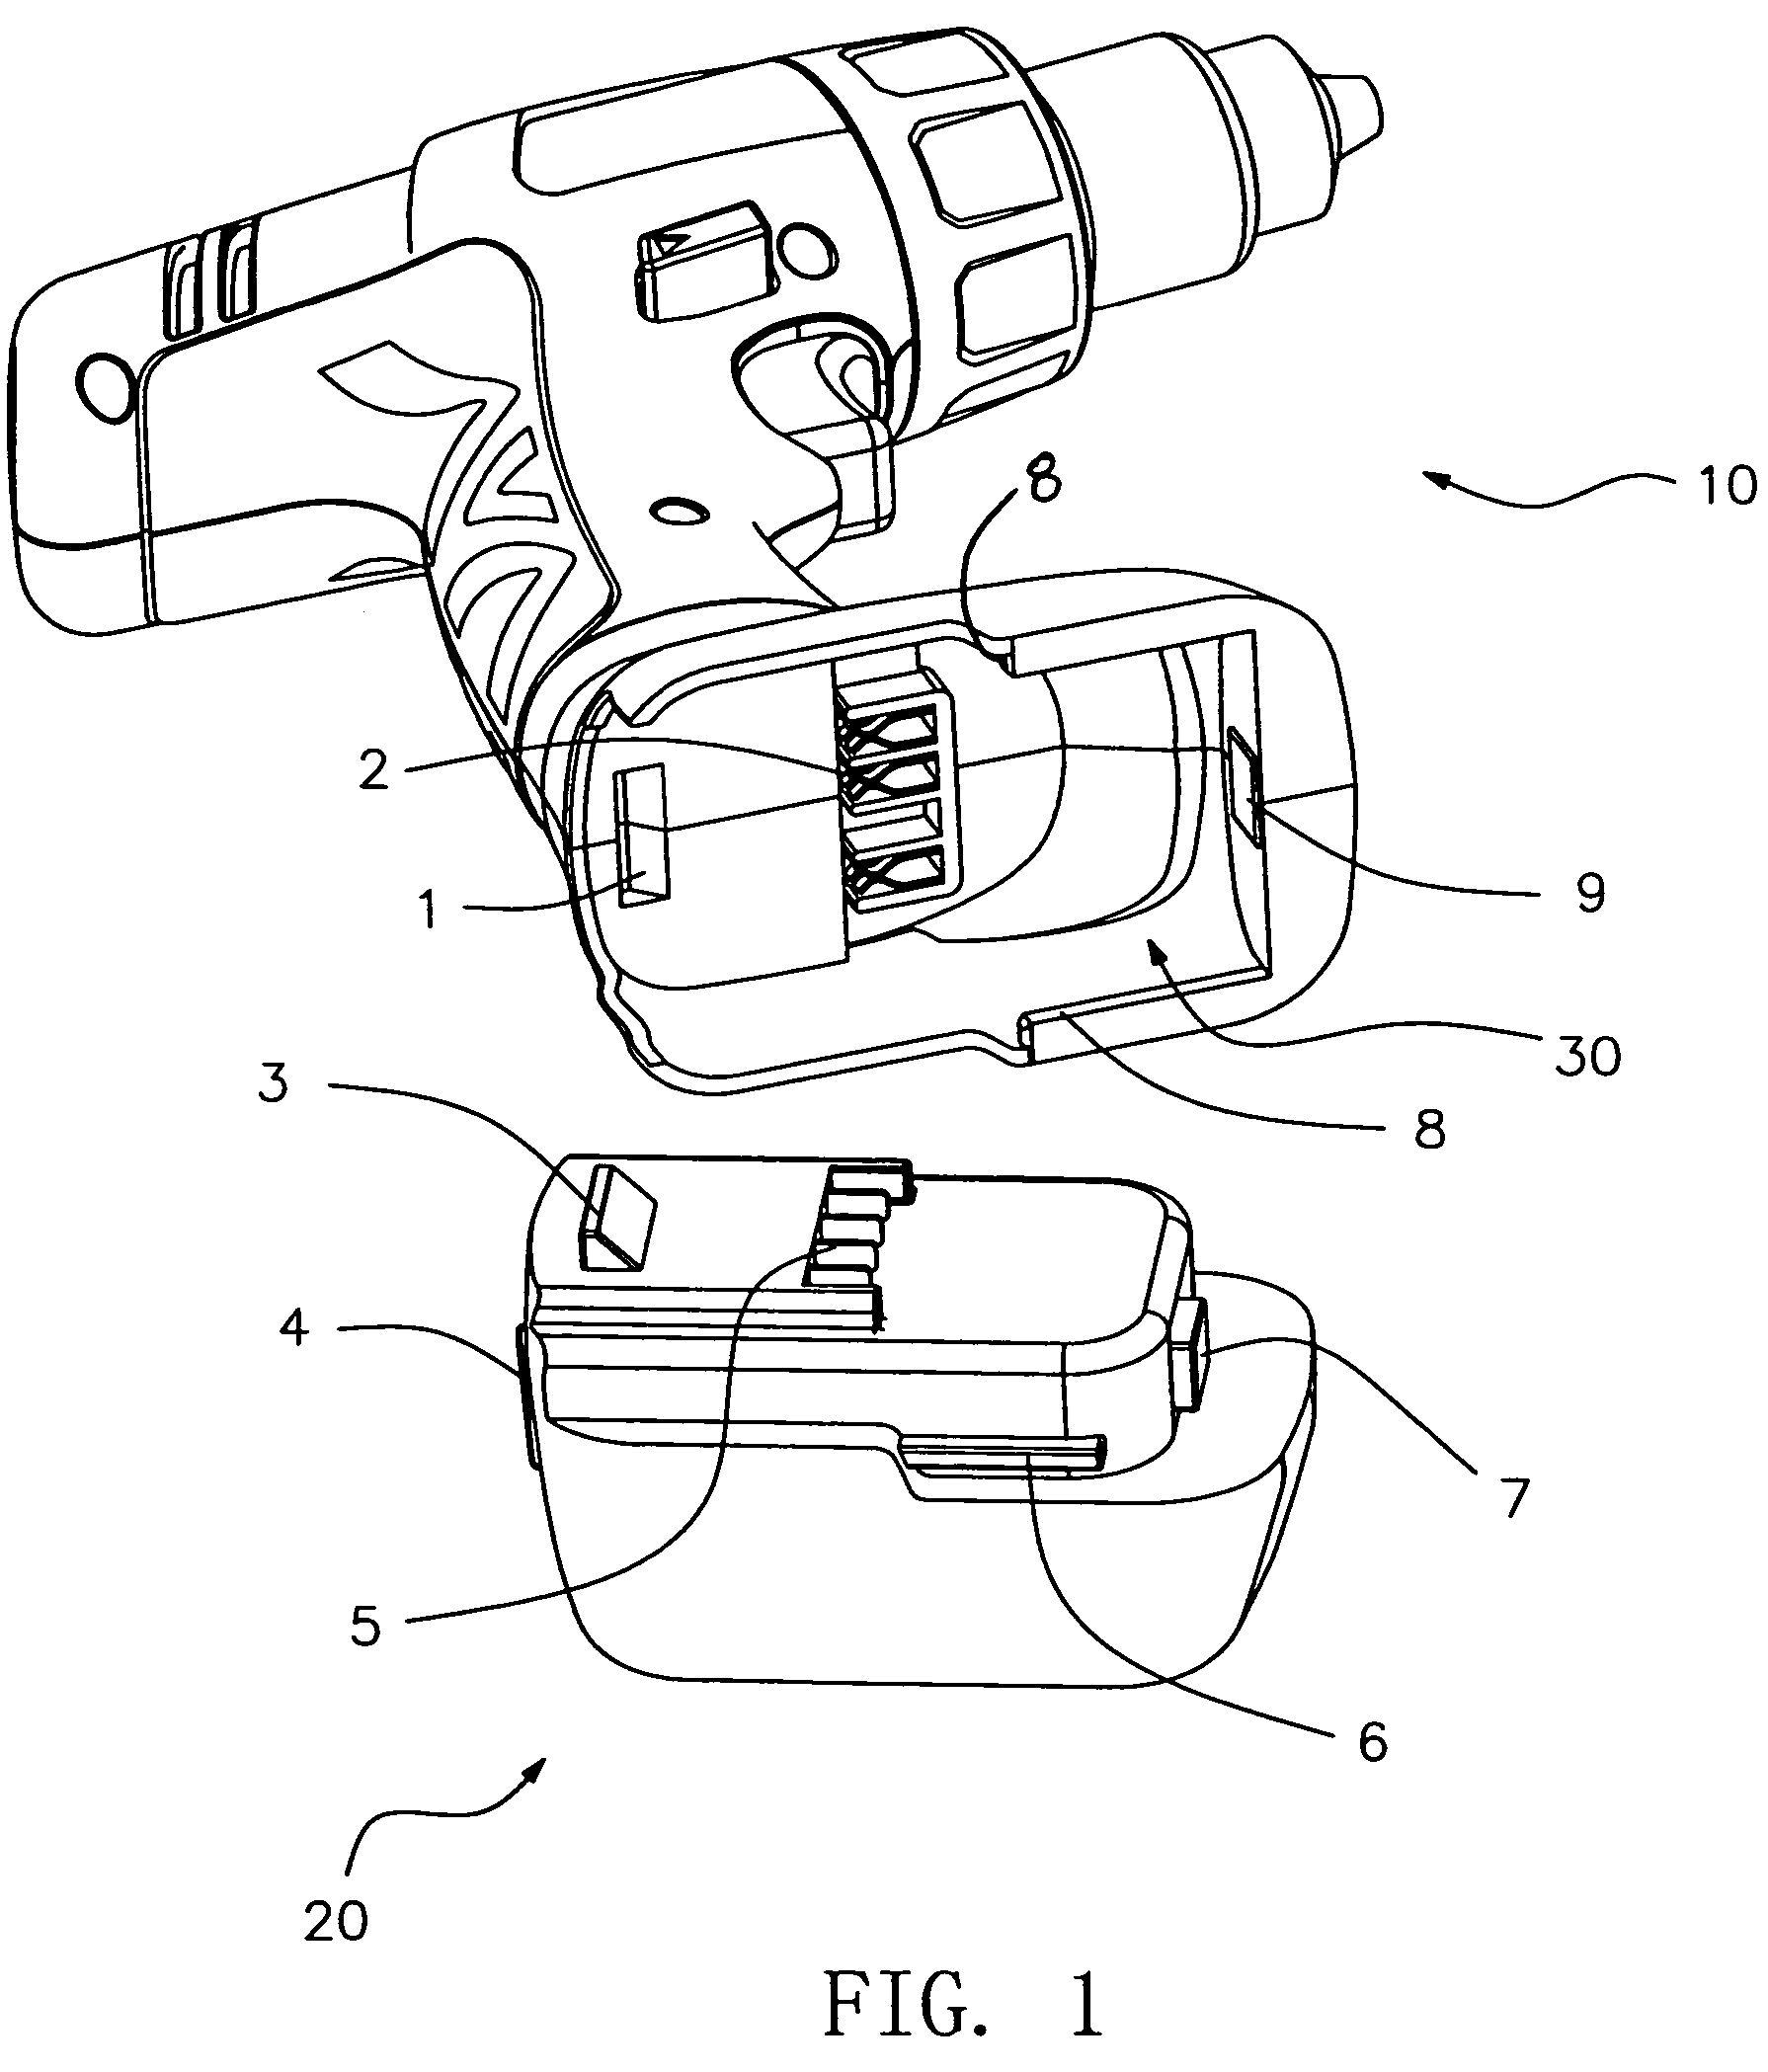 Power tool with battery power supply